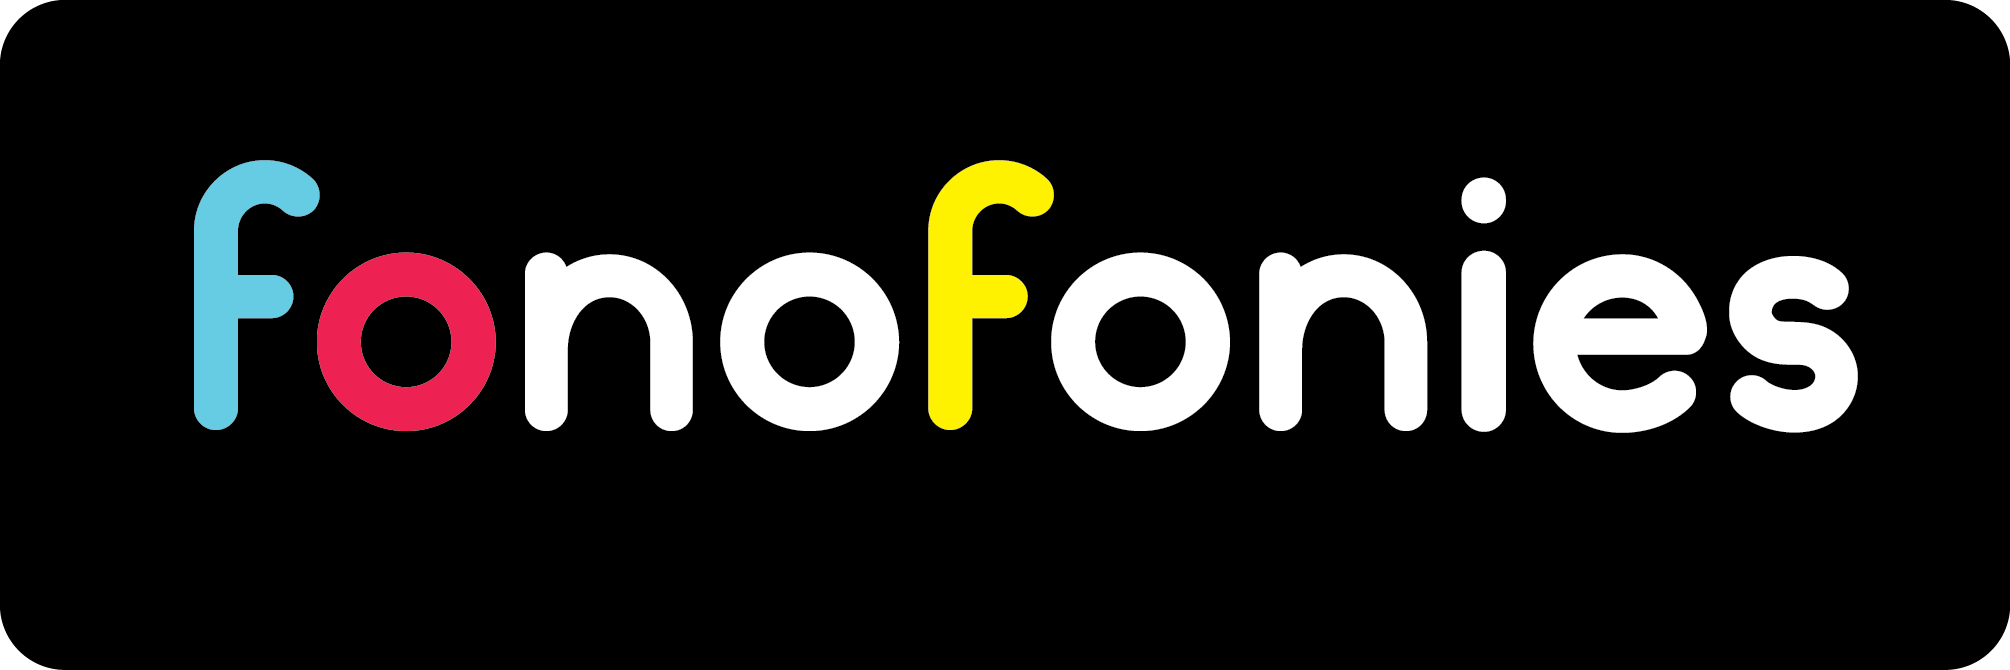 Launch of the Fonofonies App